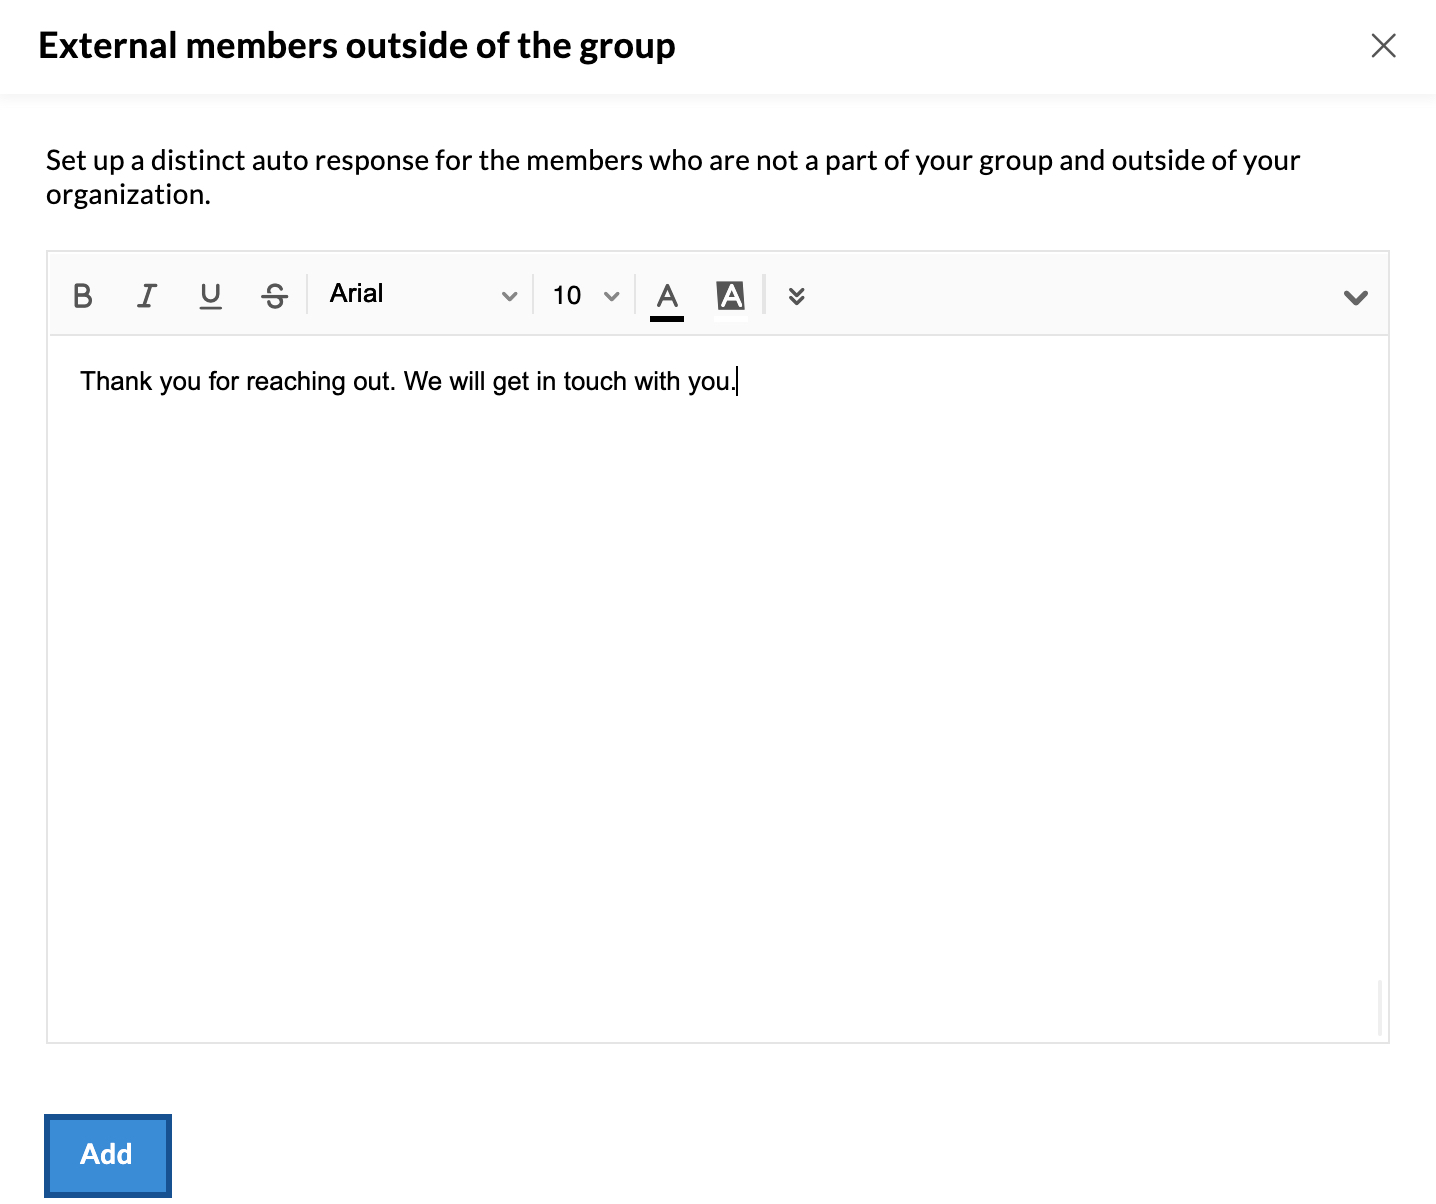 response to external members outside the group